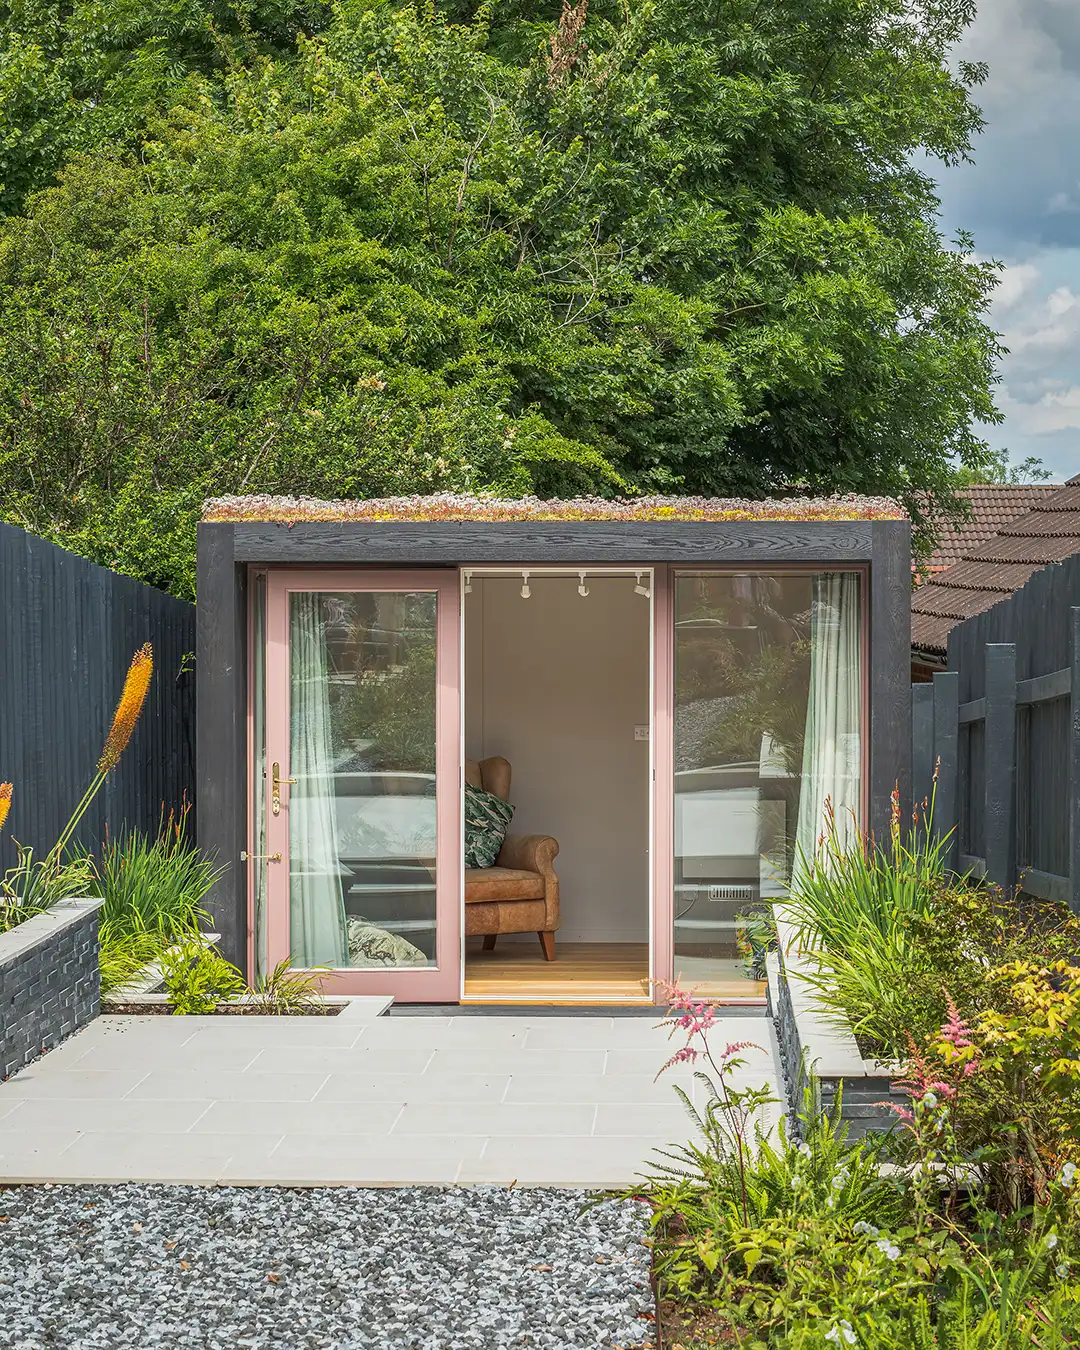 A garden office with pink windows and an open door on a summers day